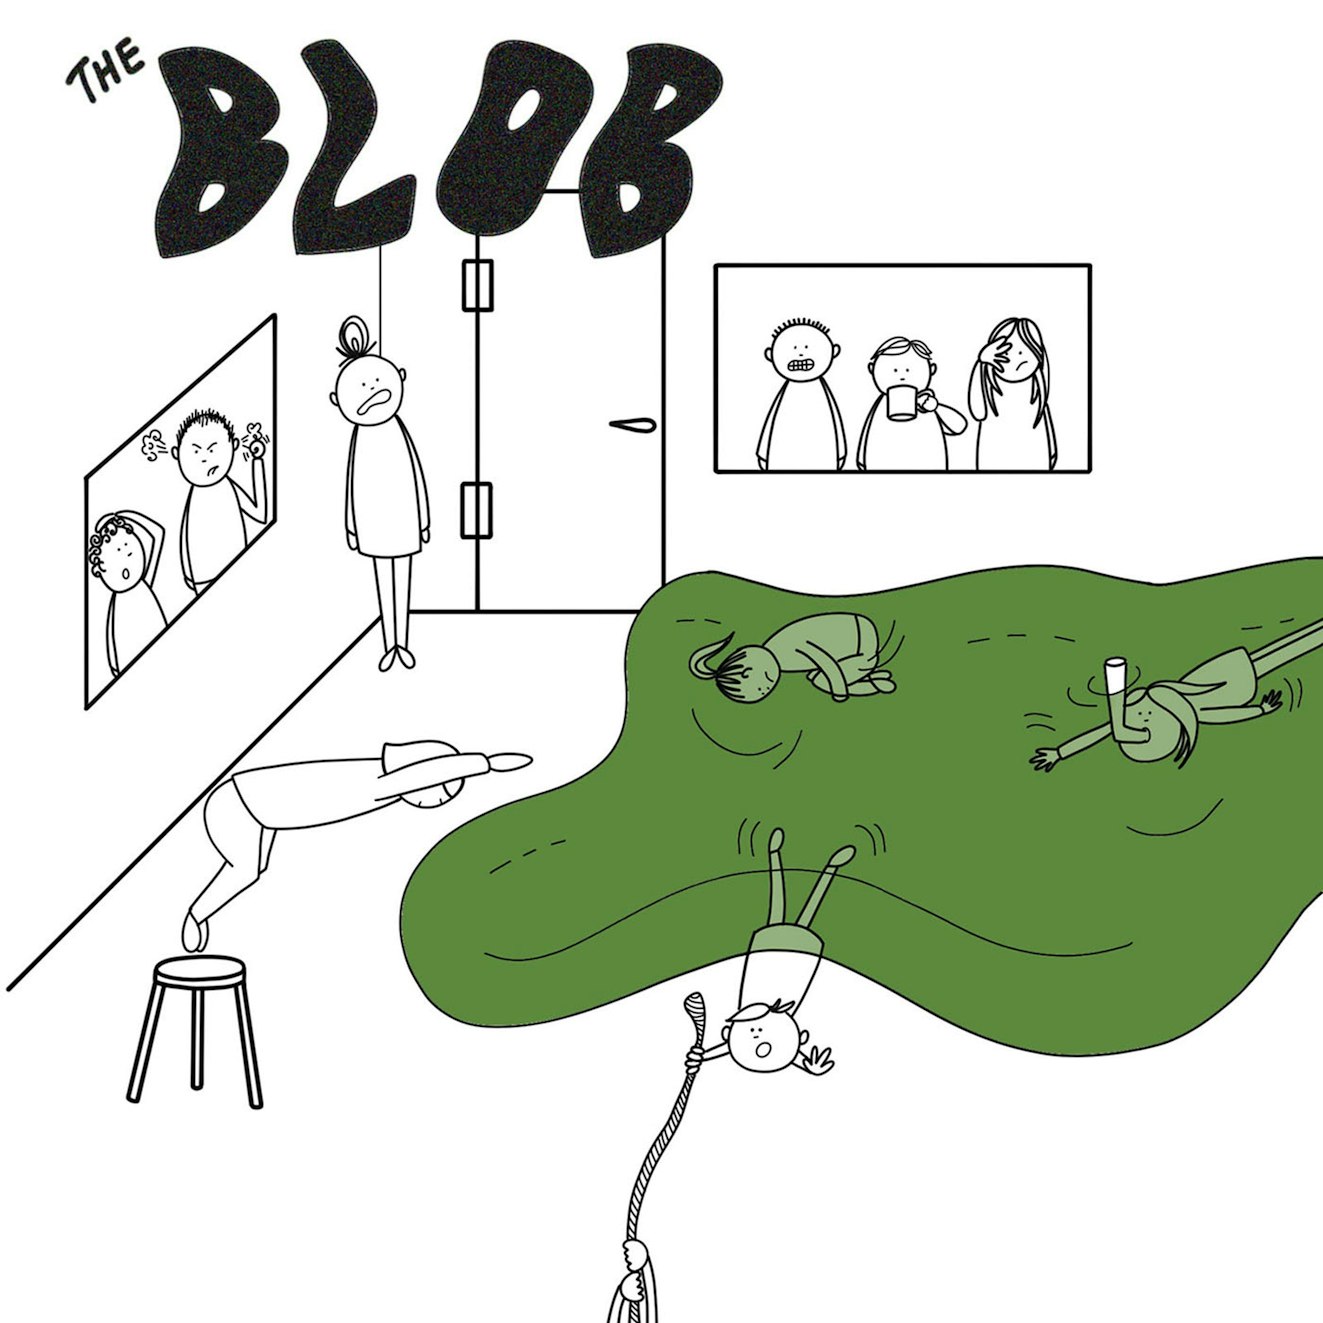 illustration representing the support queue as an enormous, gelatinous, sticky, messy blob